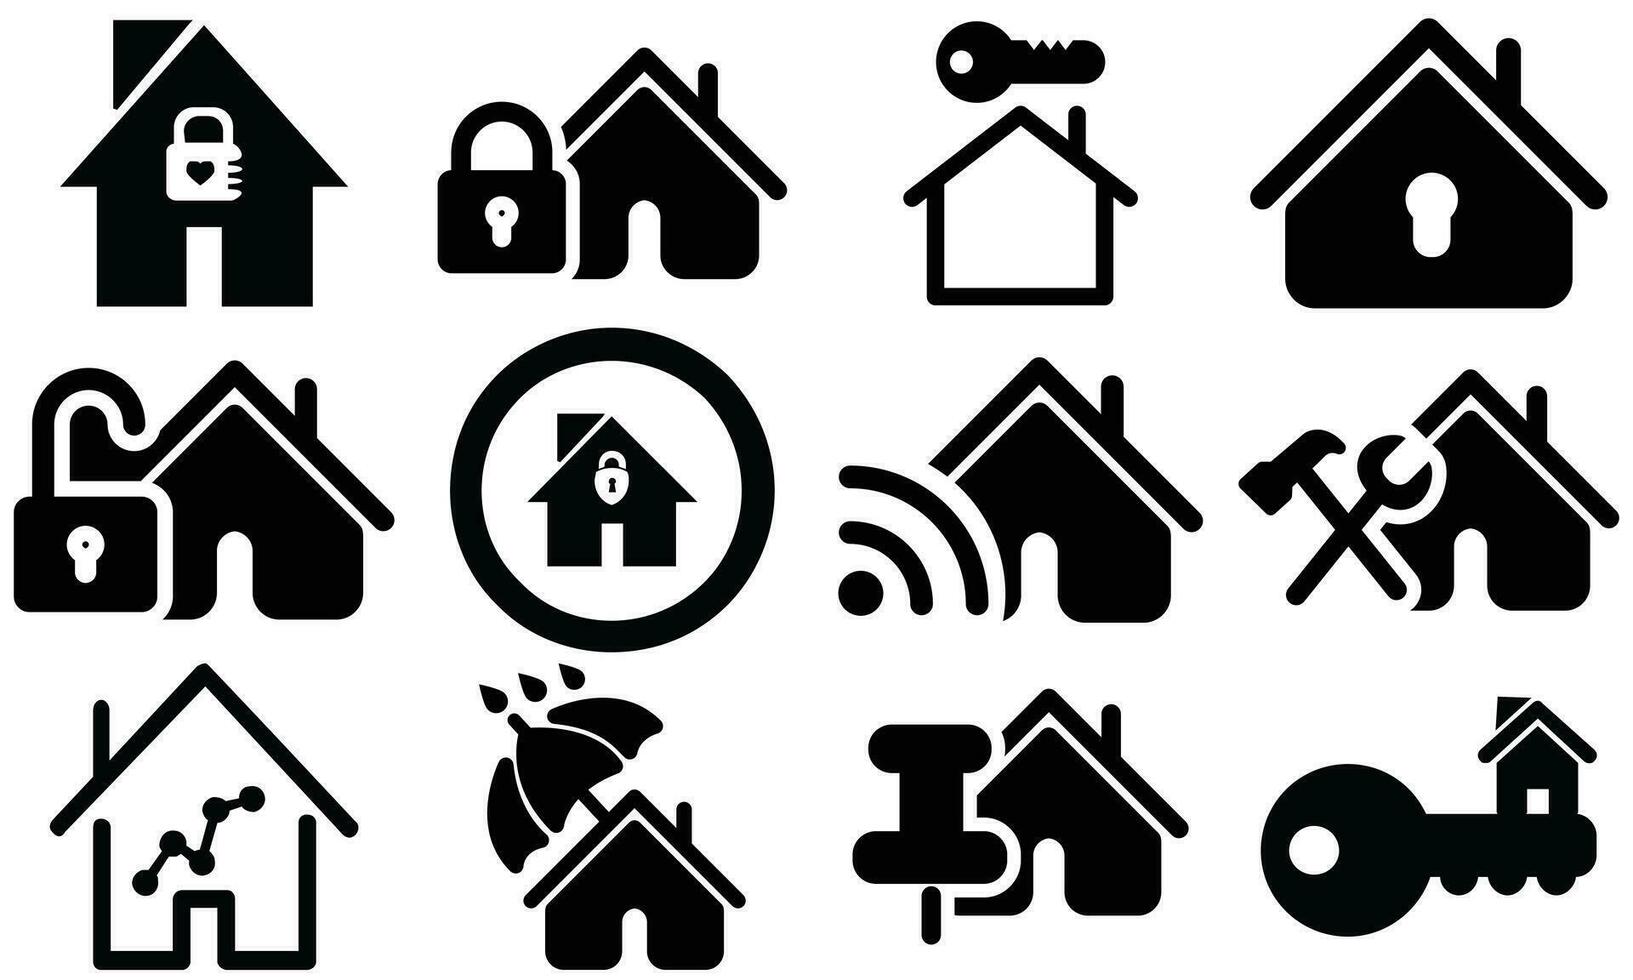 House Icon Set. Home vector illustration symbol. House icons sign,  House and home simple symbols, Houses icons set